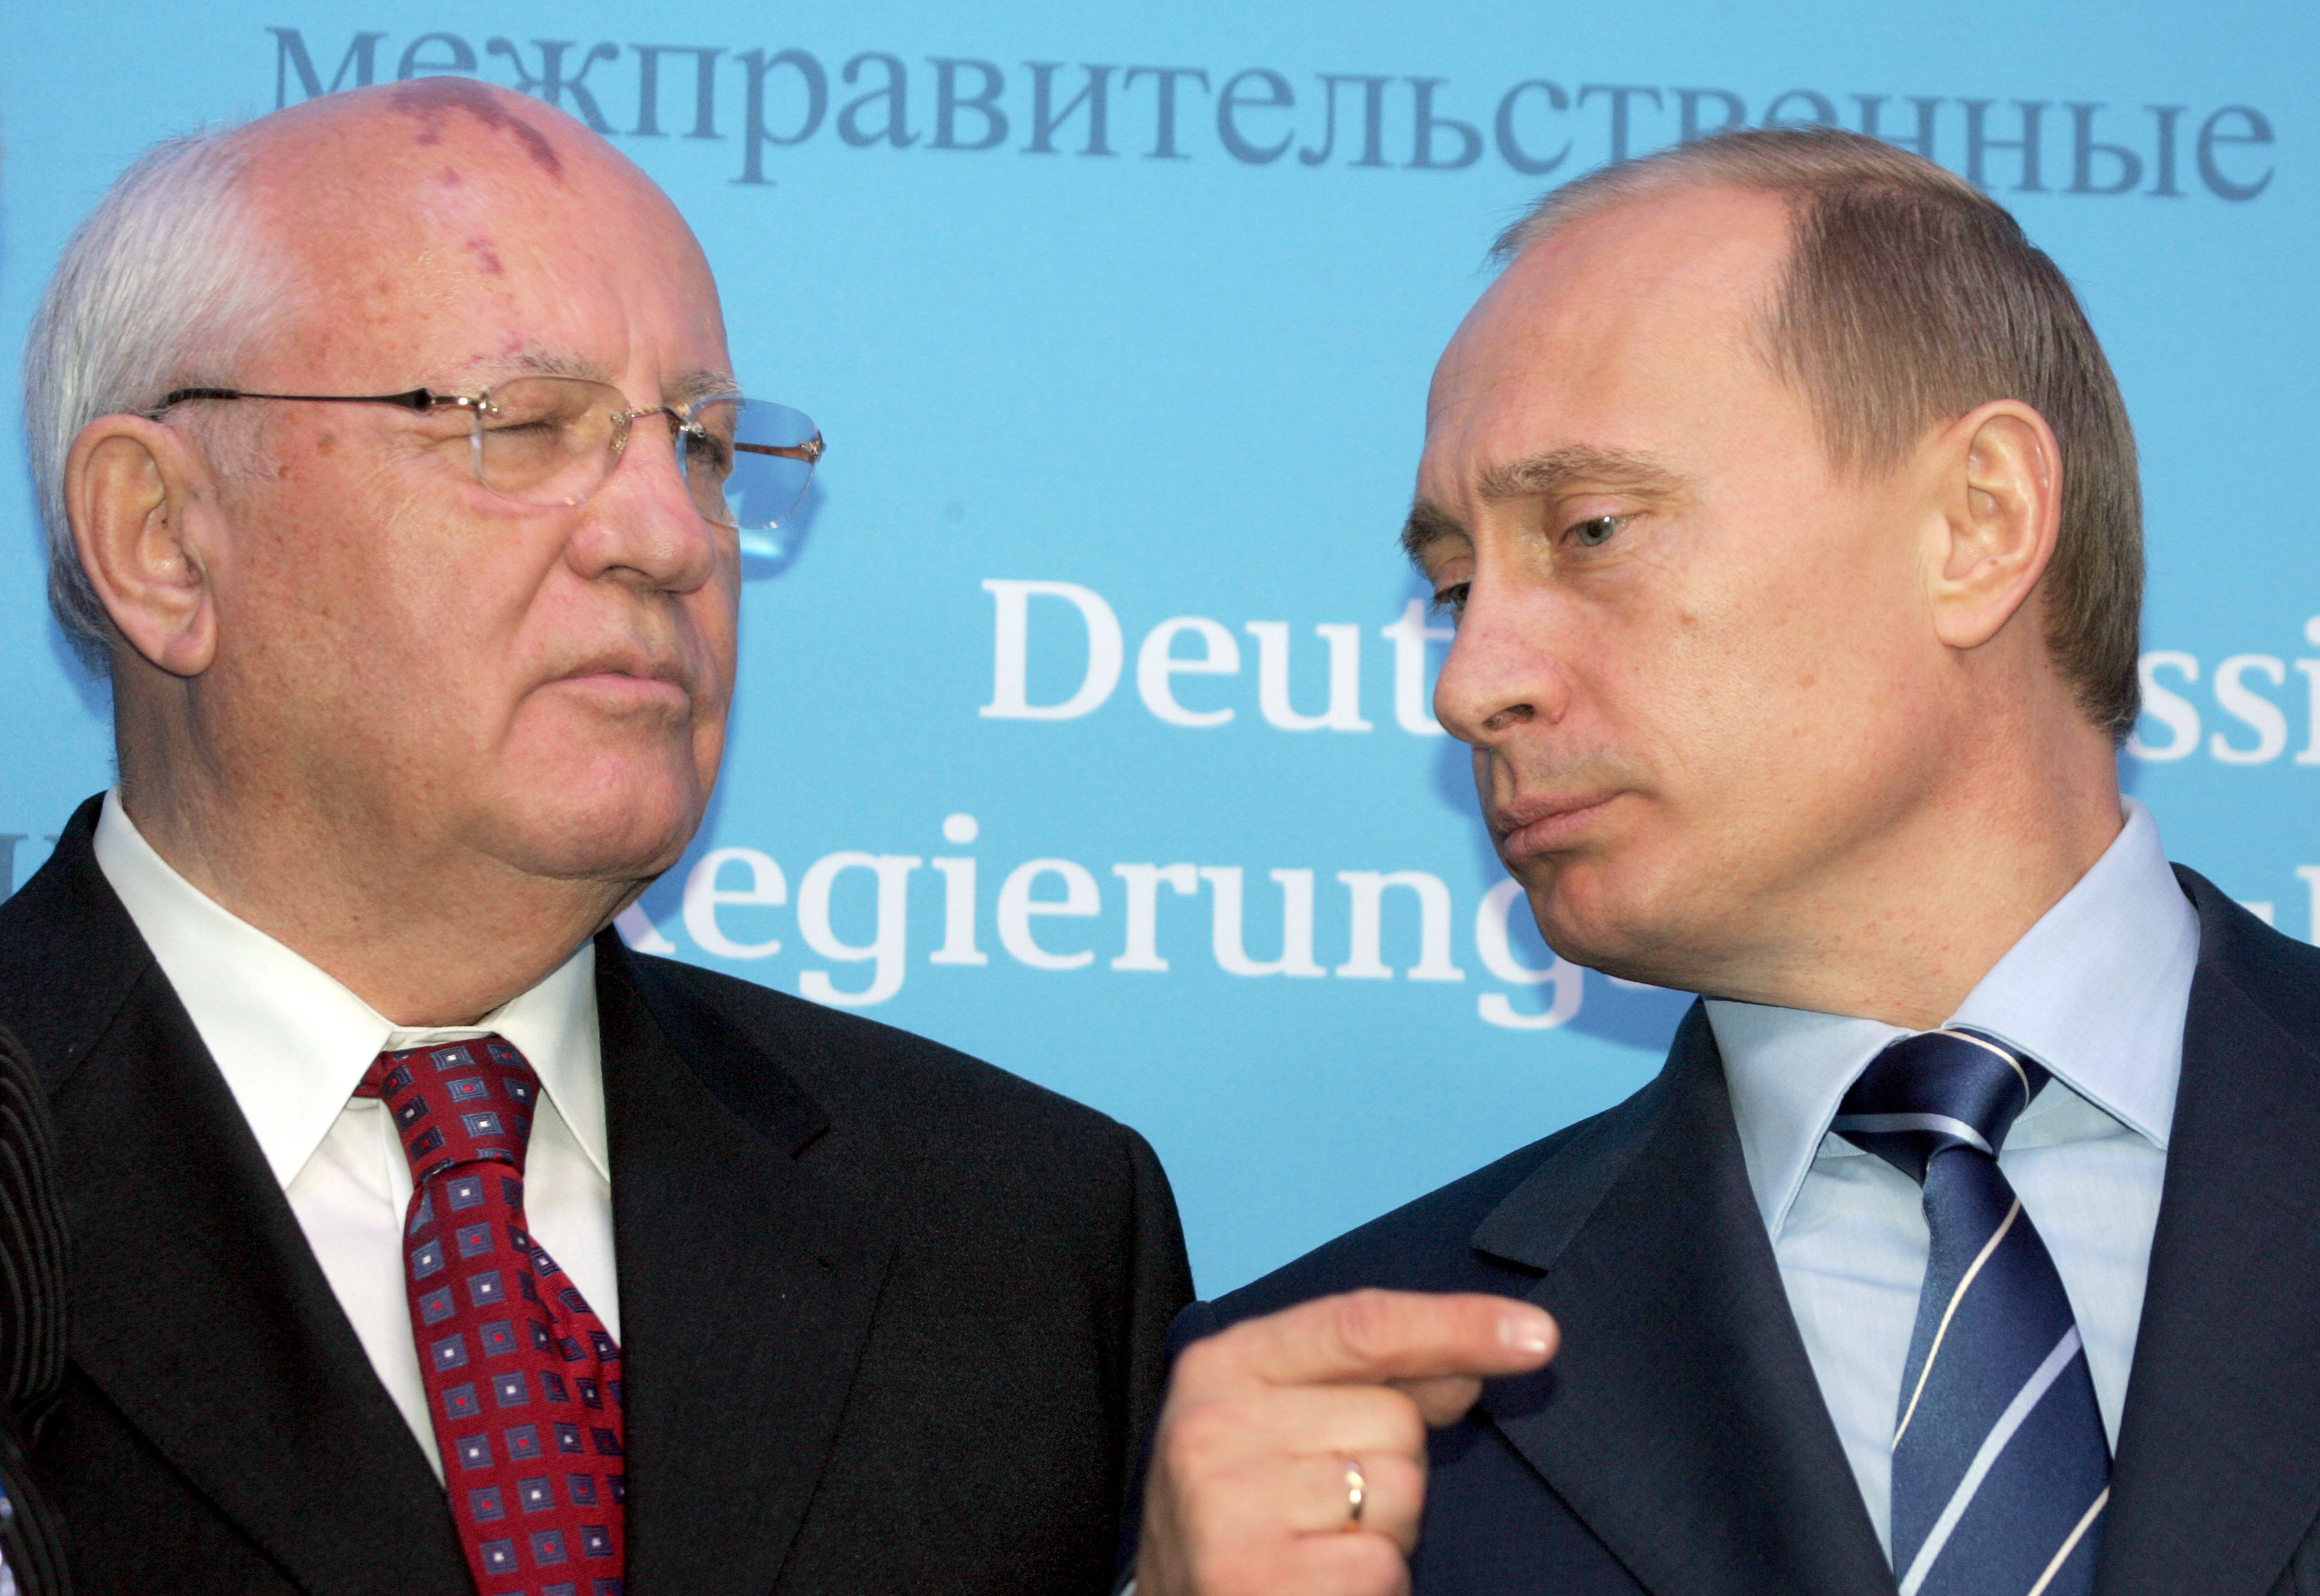 (FILES) In this file photo taken on December 21, 2004 Russian President Vladimir Putin (R) talks to former Soviet President Mikhail Gorbachev (L) prior to a joint press conference of German Chancellor Gerhard Schroeder and Putin at Gottorf castle in Schleswig. - Mikhail Gorbachev, who changed the course of history by triggering the demise of the Soviet Union and was one of the great figures of the 20th century, died in Moscow on August 30, 2022 aged 91. Russian President Vladimir Putin said on August 31, 2022 that Mikhail Gorbachev, made a 'huge impact' on world history. (Photo by Alexander NEMENOV / AFP)